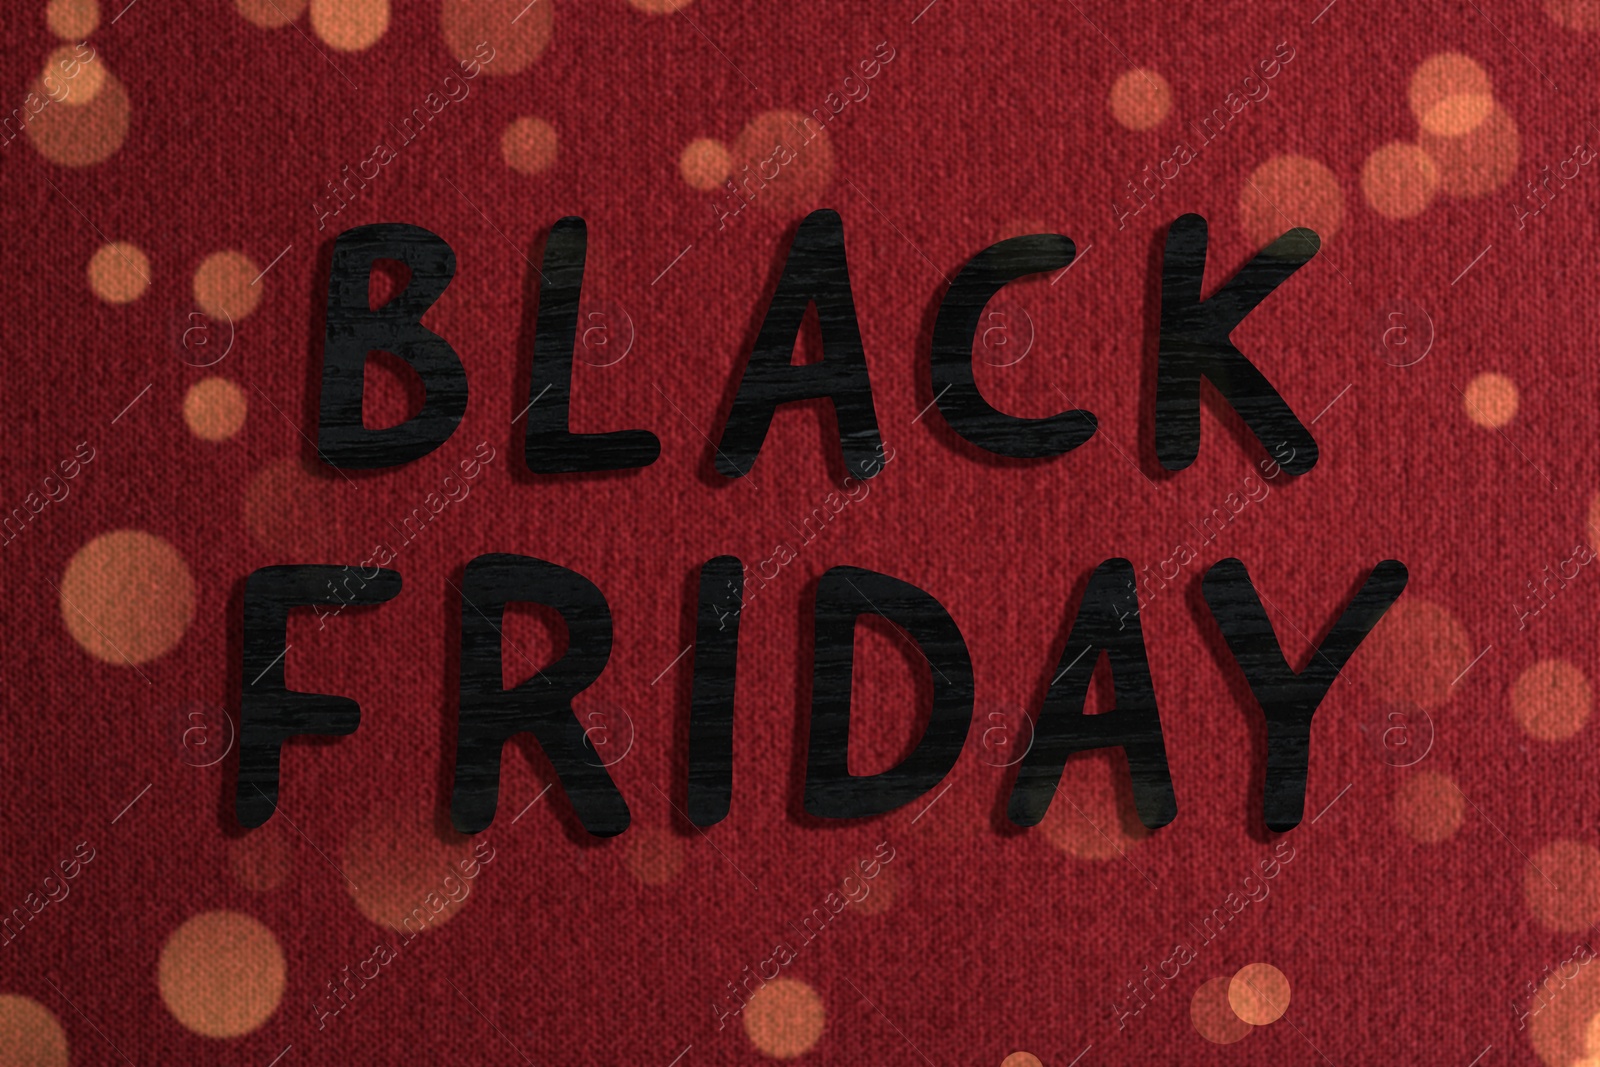 Image of Phrase Black Friday and beautiful red fabric on background 